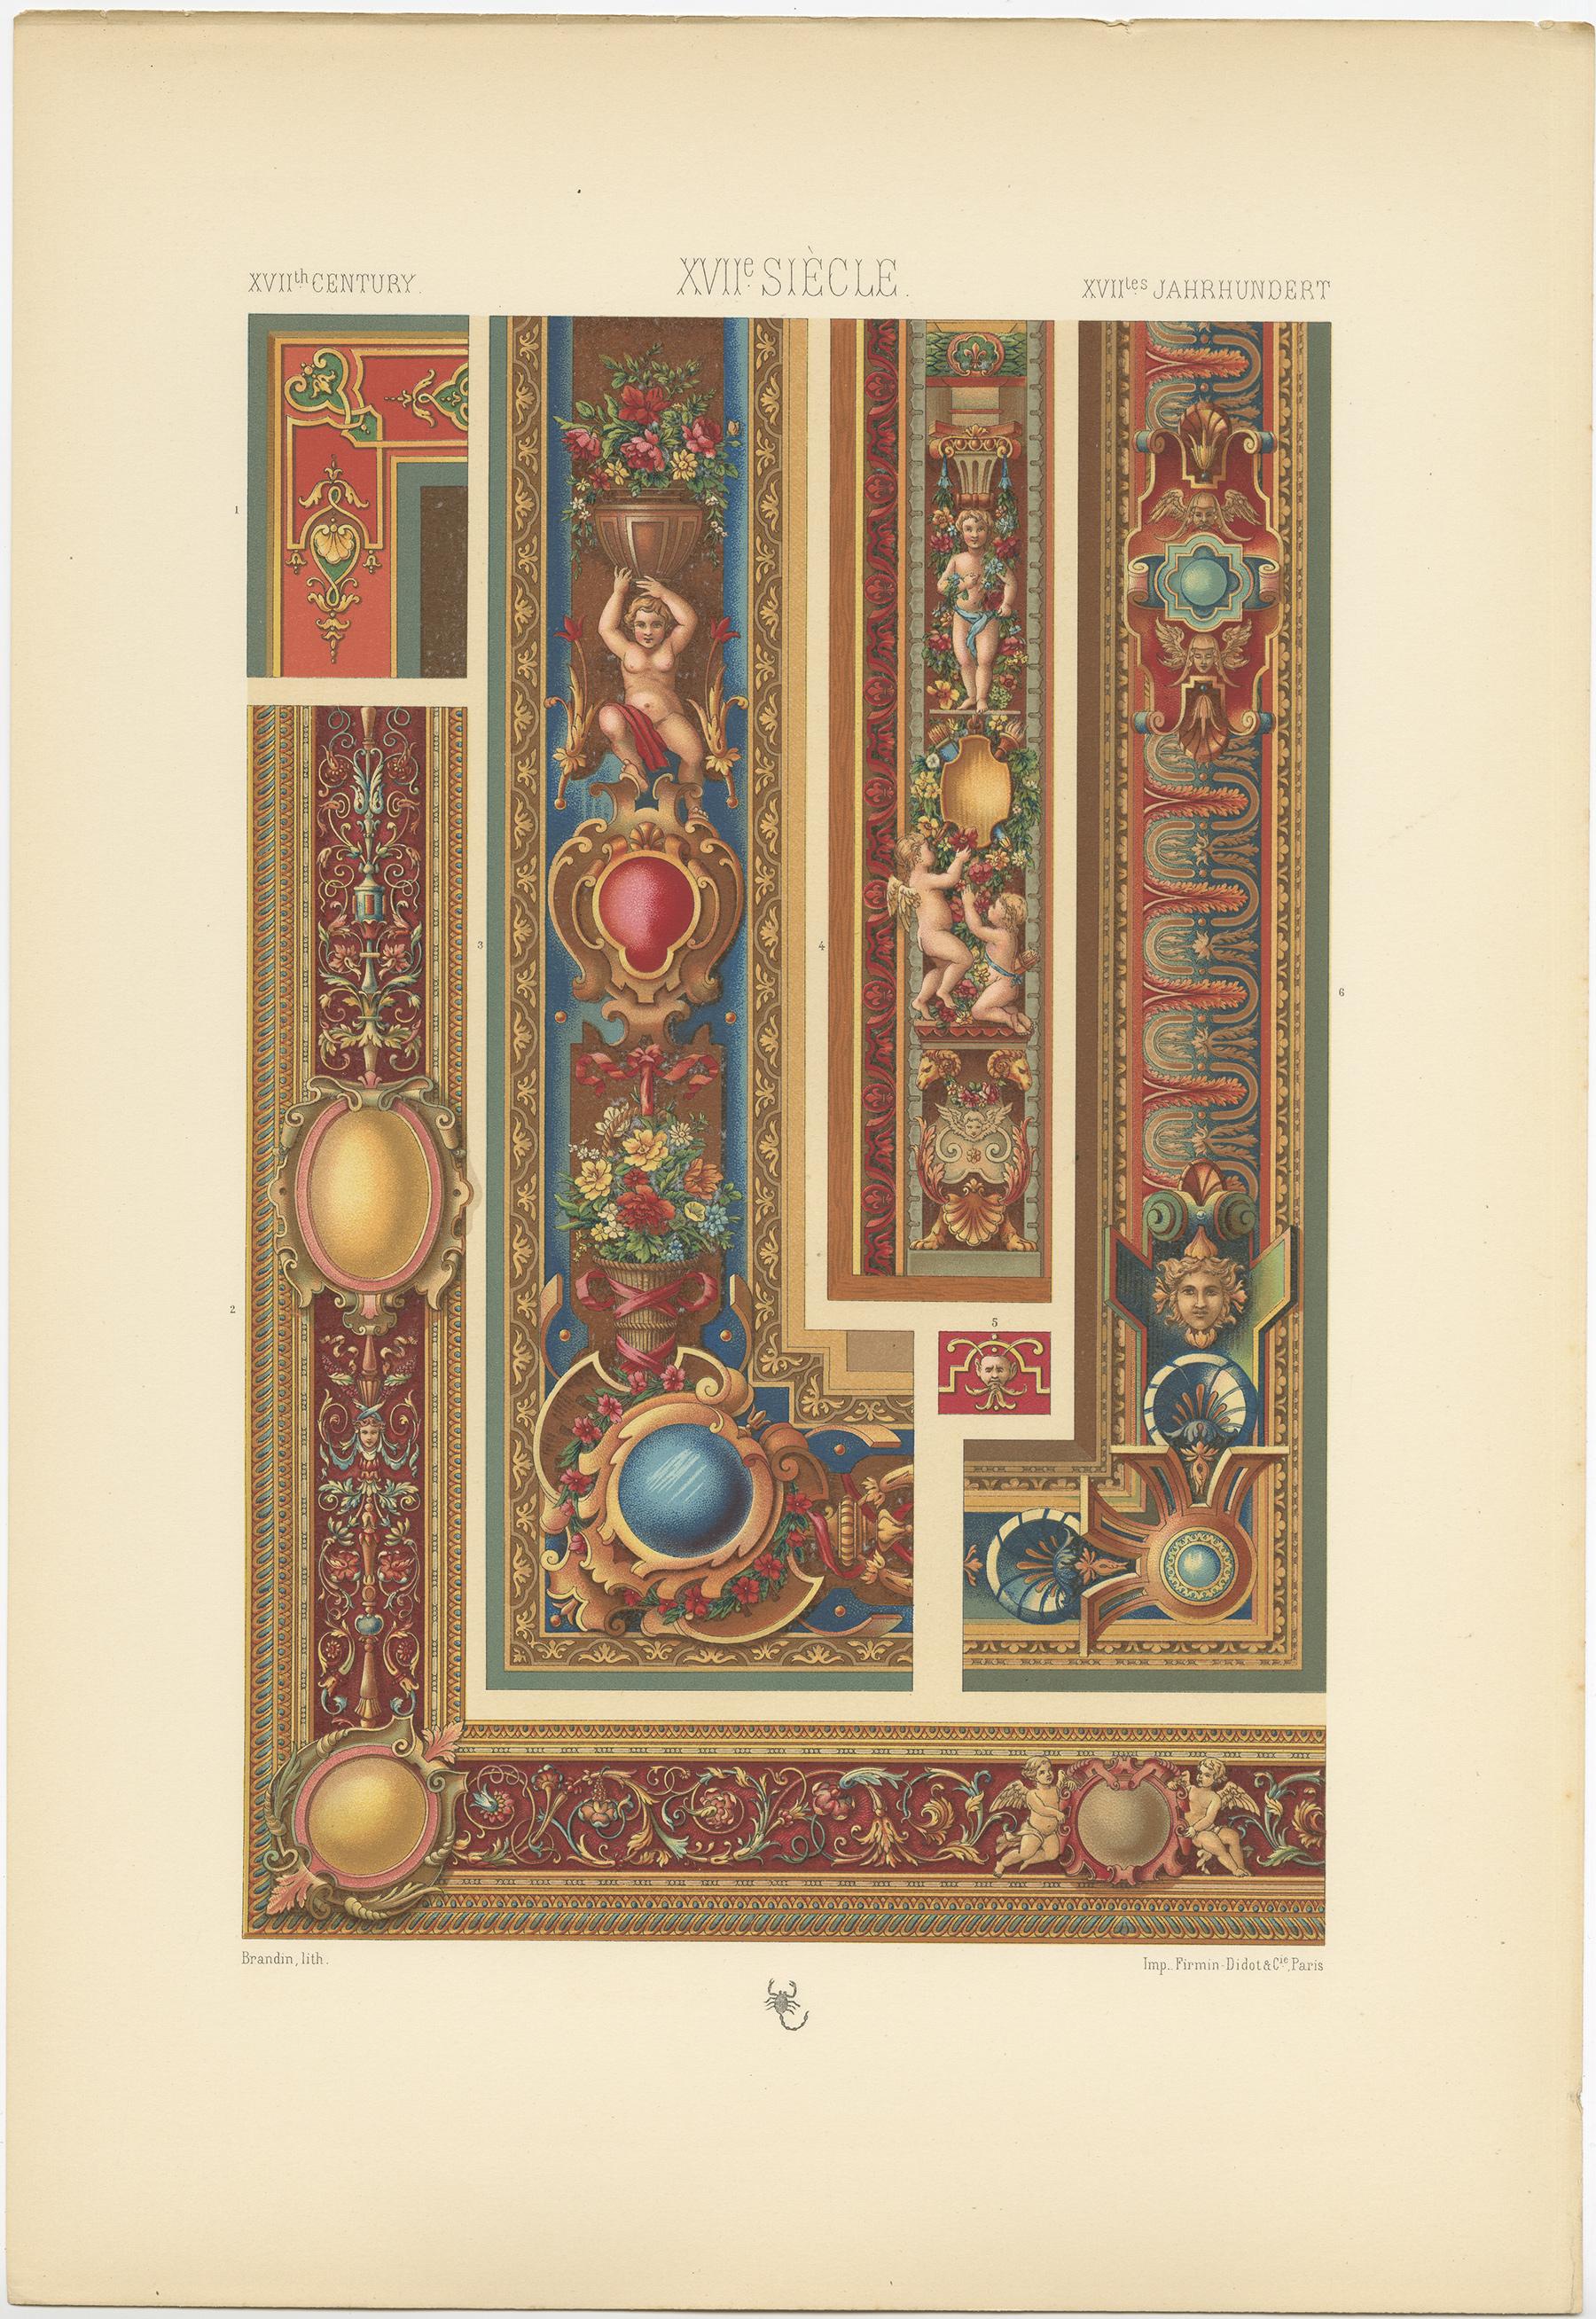 Antique print titled '17th Century - XVIIc Siècle - XVIILes Jahrhundert'. Chromolithograph of tapestry, borders and corners, England and France ornaments. This print originates from 'l'Ornement Polychrome' by Auguste Racinet. Published circa 1890.